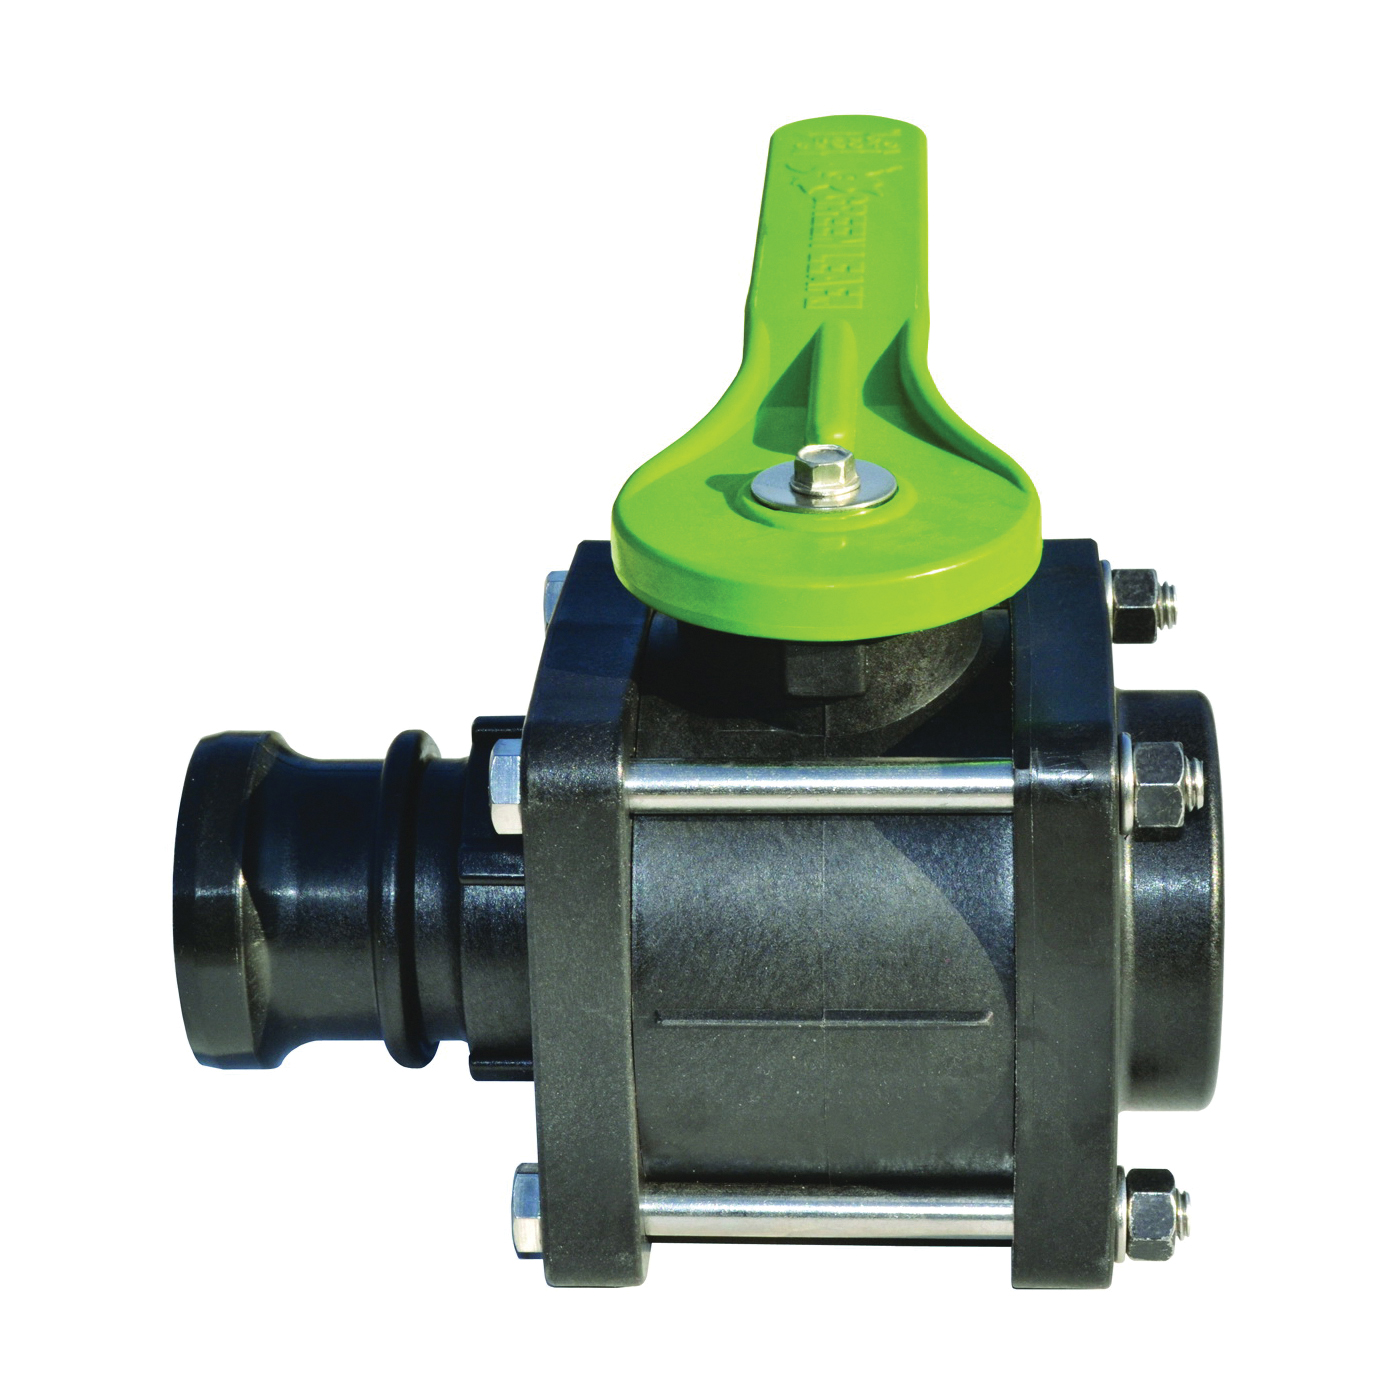 VF204FP Ball Valve, 2 x 2 in Connection, Female NPT x Male, 125 psi Pressure, Manual Actuator, Polypropylene Body